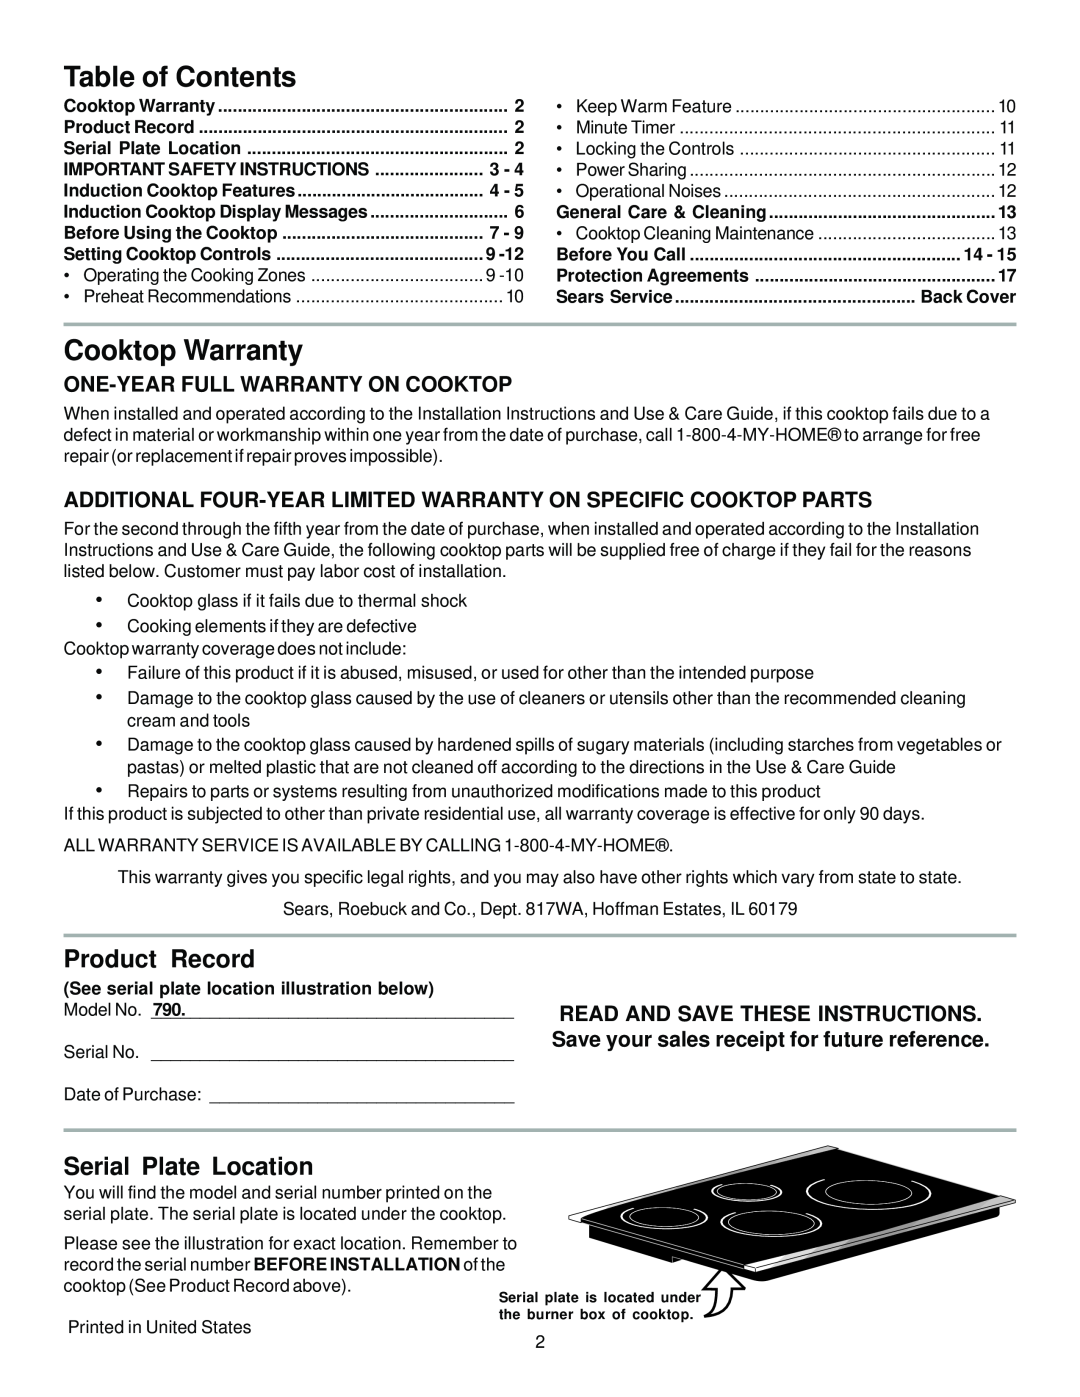 Sears 790.428 manual Table of Contents, Cooktop Warranty, Product Record, Serial Plate Location 